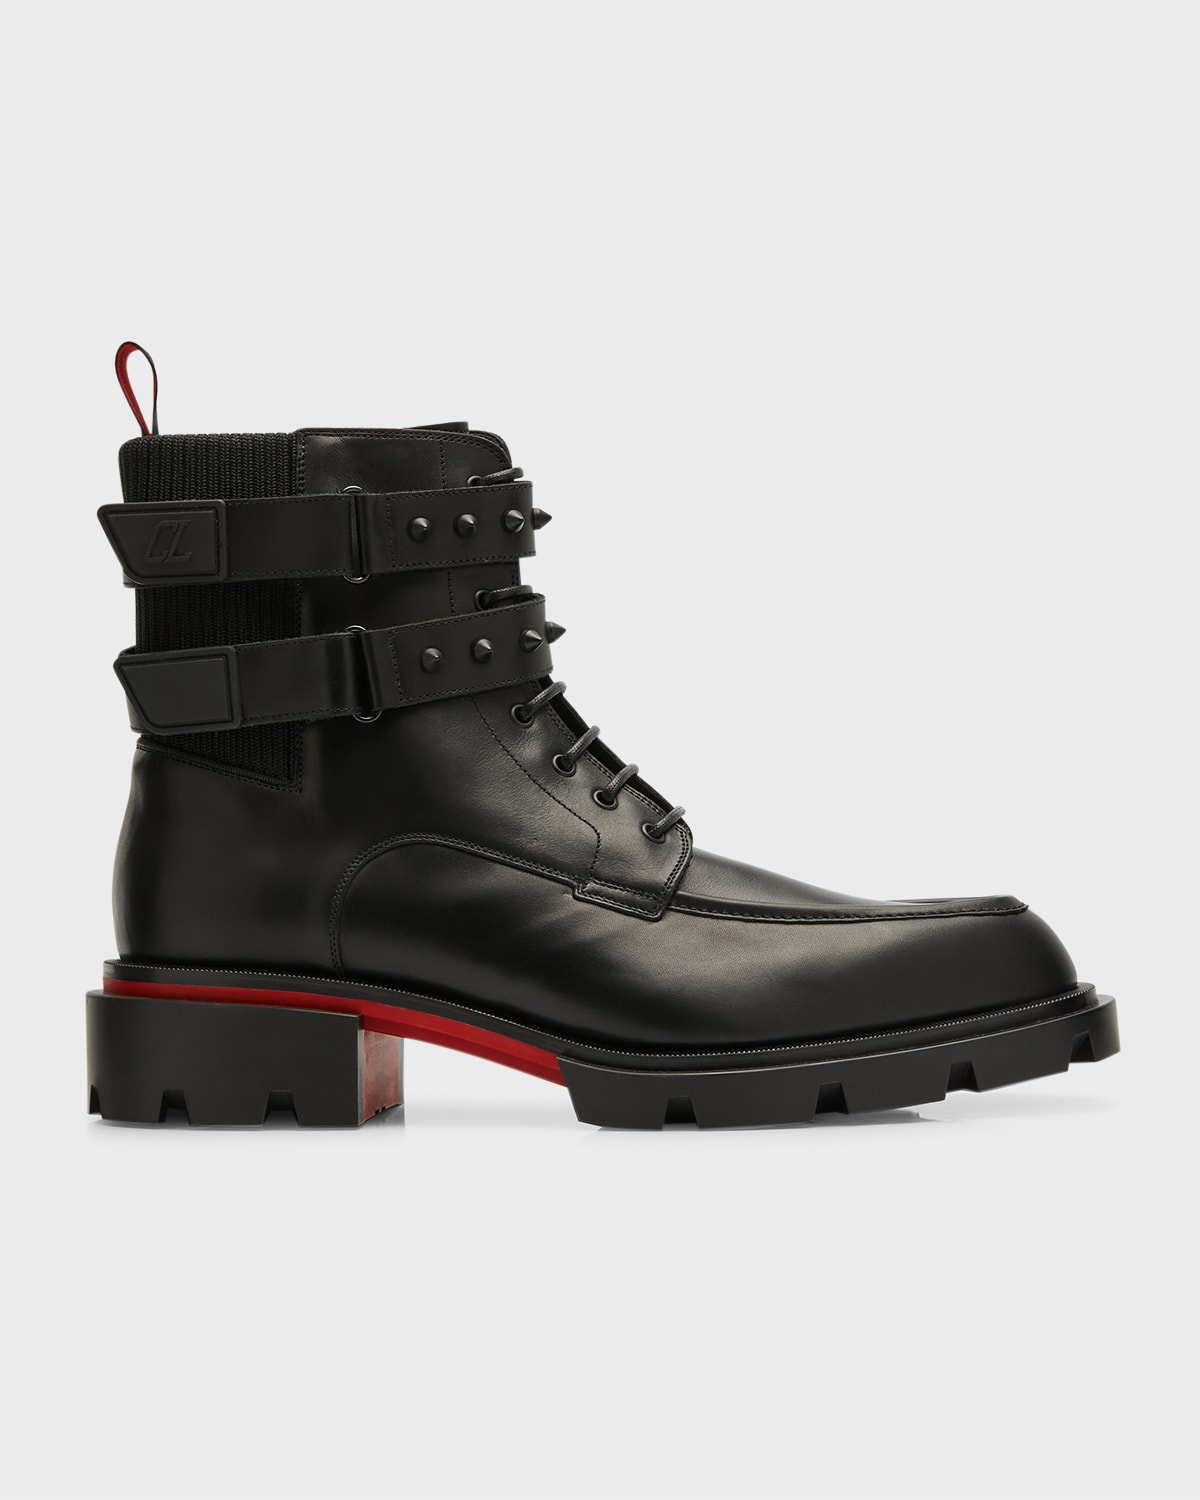 Christian Louboutin Our Fight Apron Toe Combat Boot in Black for